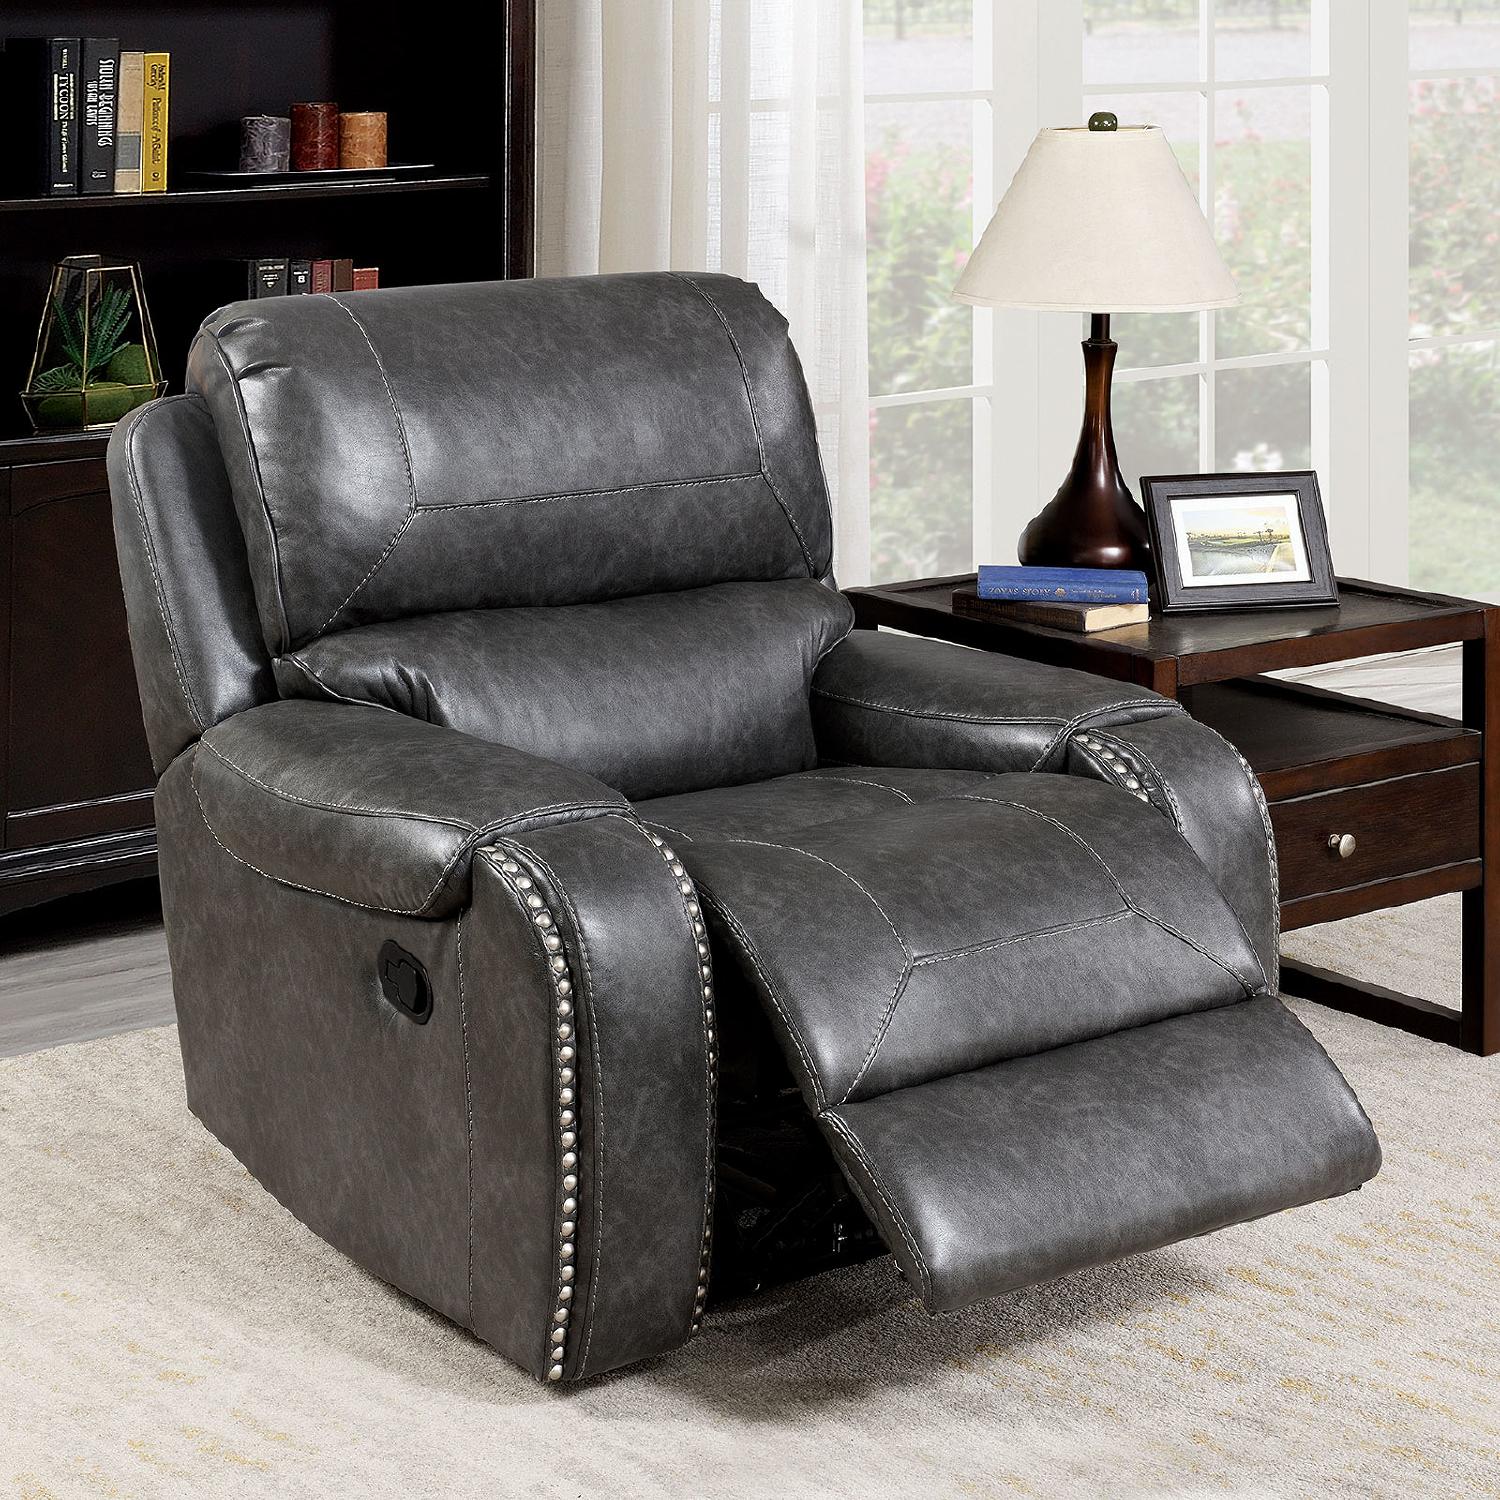 Transitional Power recliner CM6950GY-CH-PM Walter CM6950GY-CH-PM in Gray Leatherette